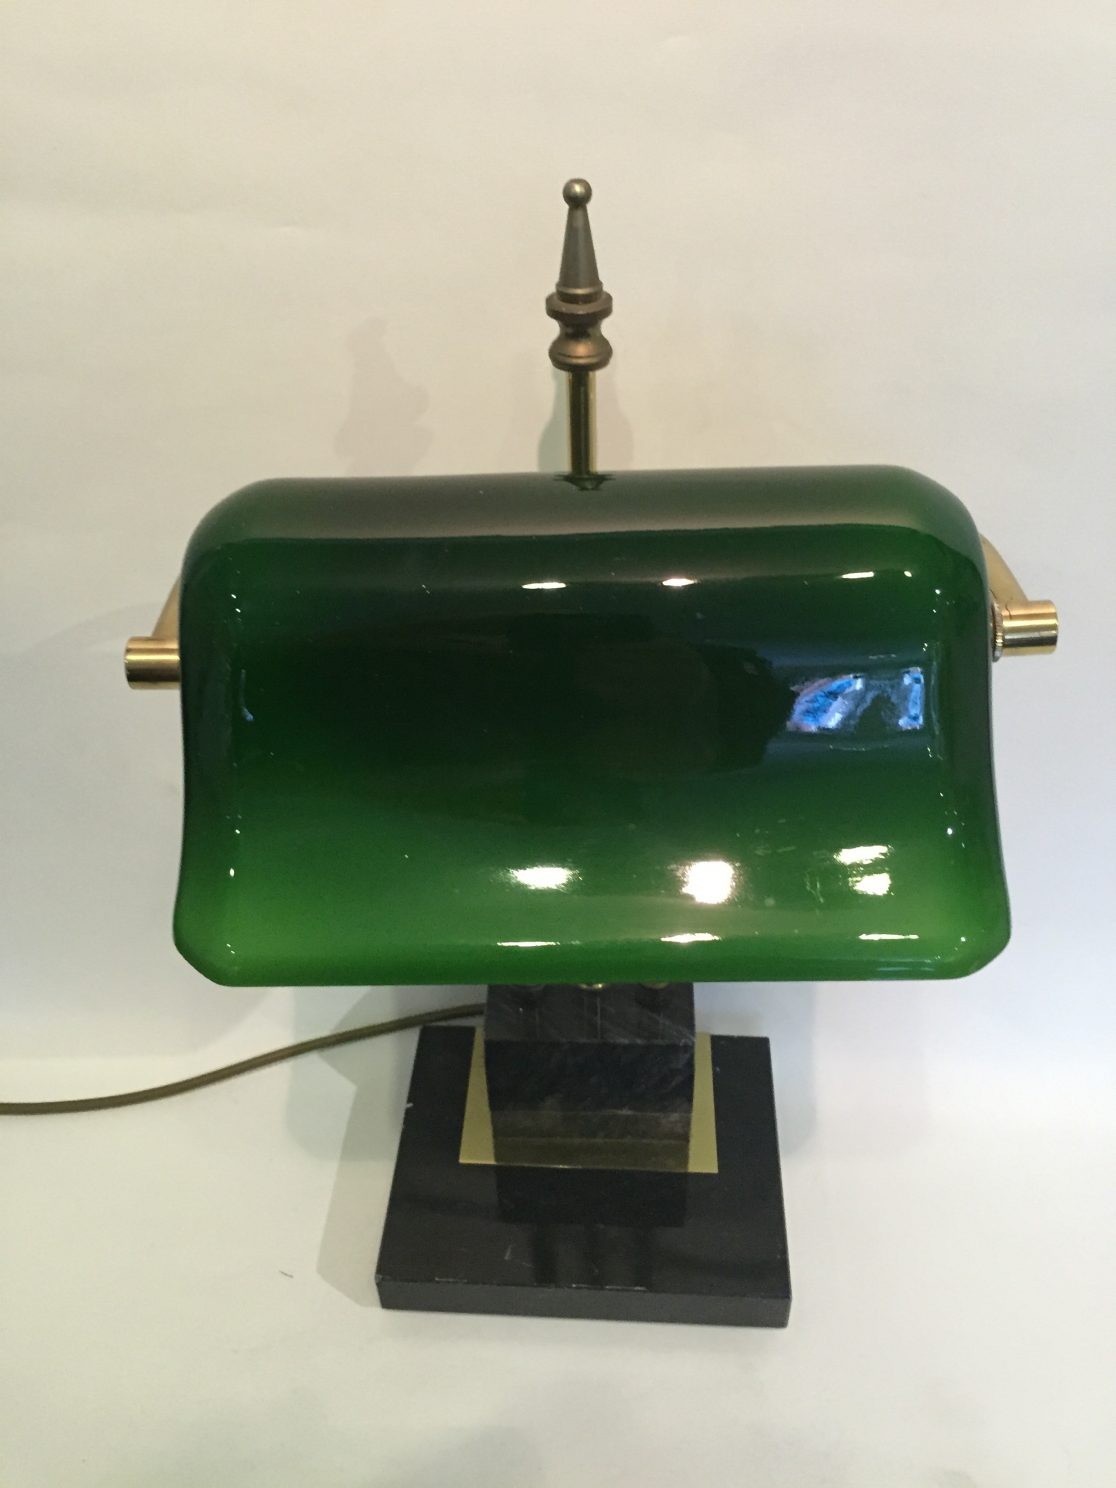 Brass Banker’s Desk Lamp with a Green Glass Shade, Brass, Marble Base